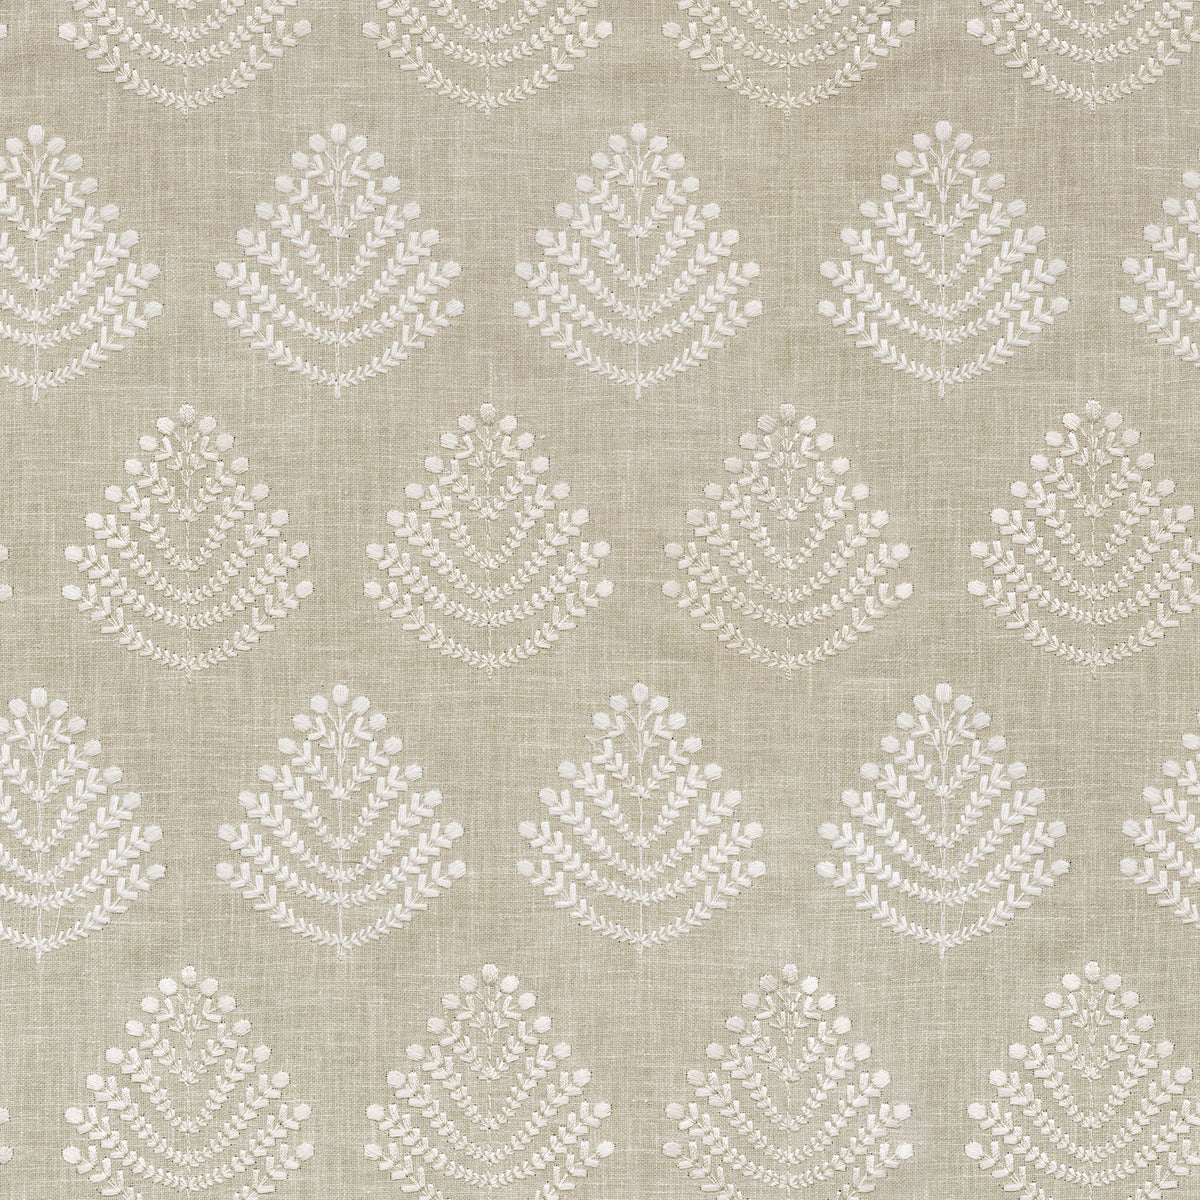 P/K Lifestyles Royal Fern Embroidery - Papyrus 408843 Fabric Swatch